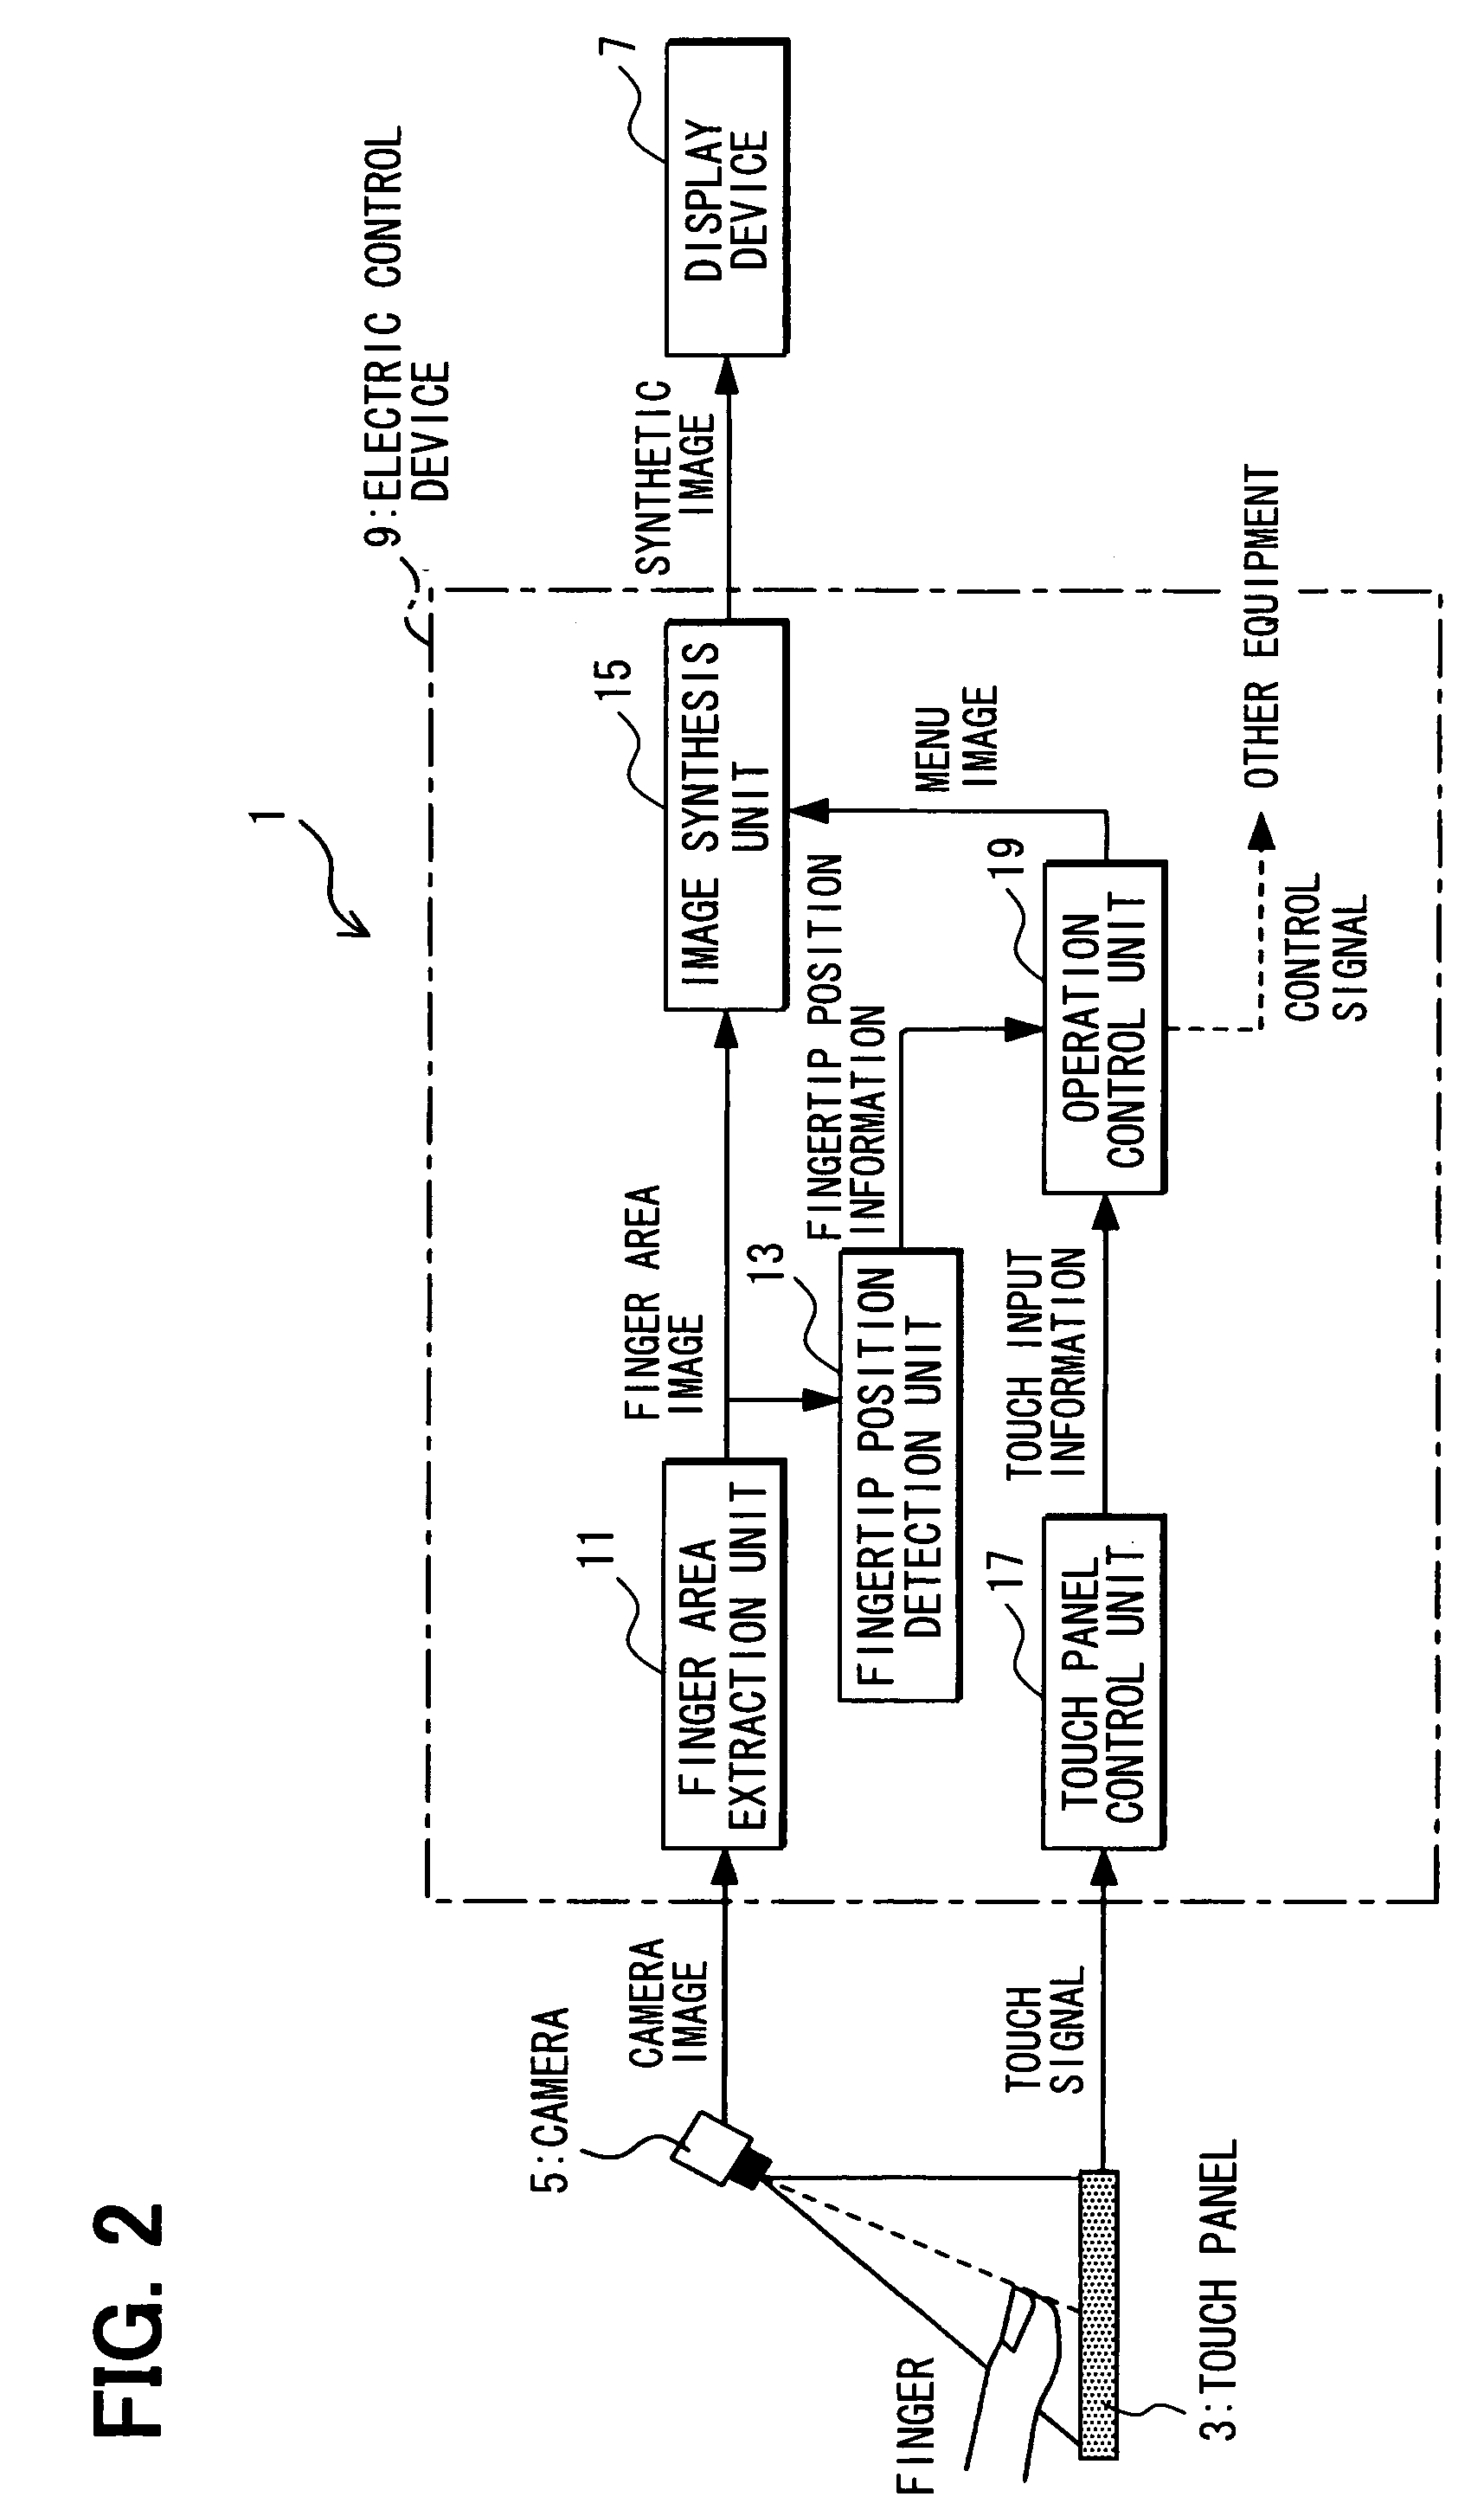 Operating input device for reducing input error